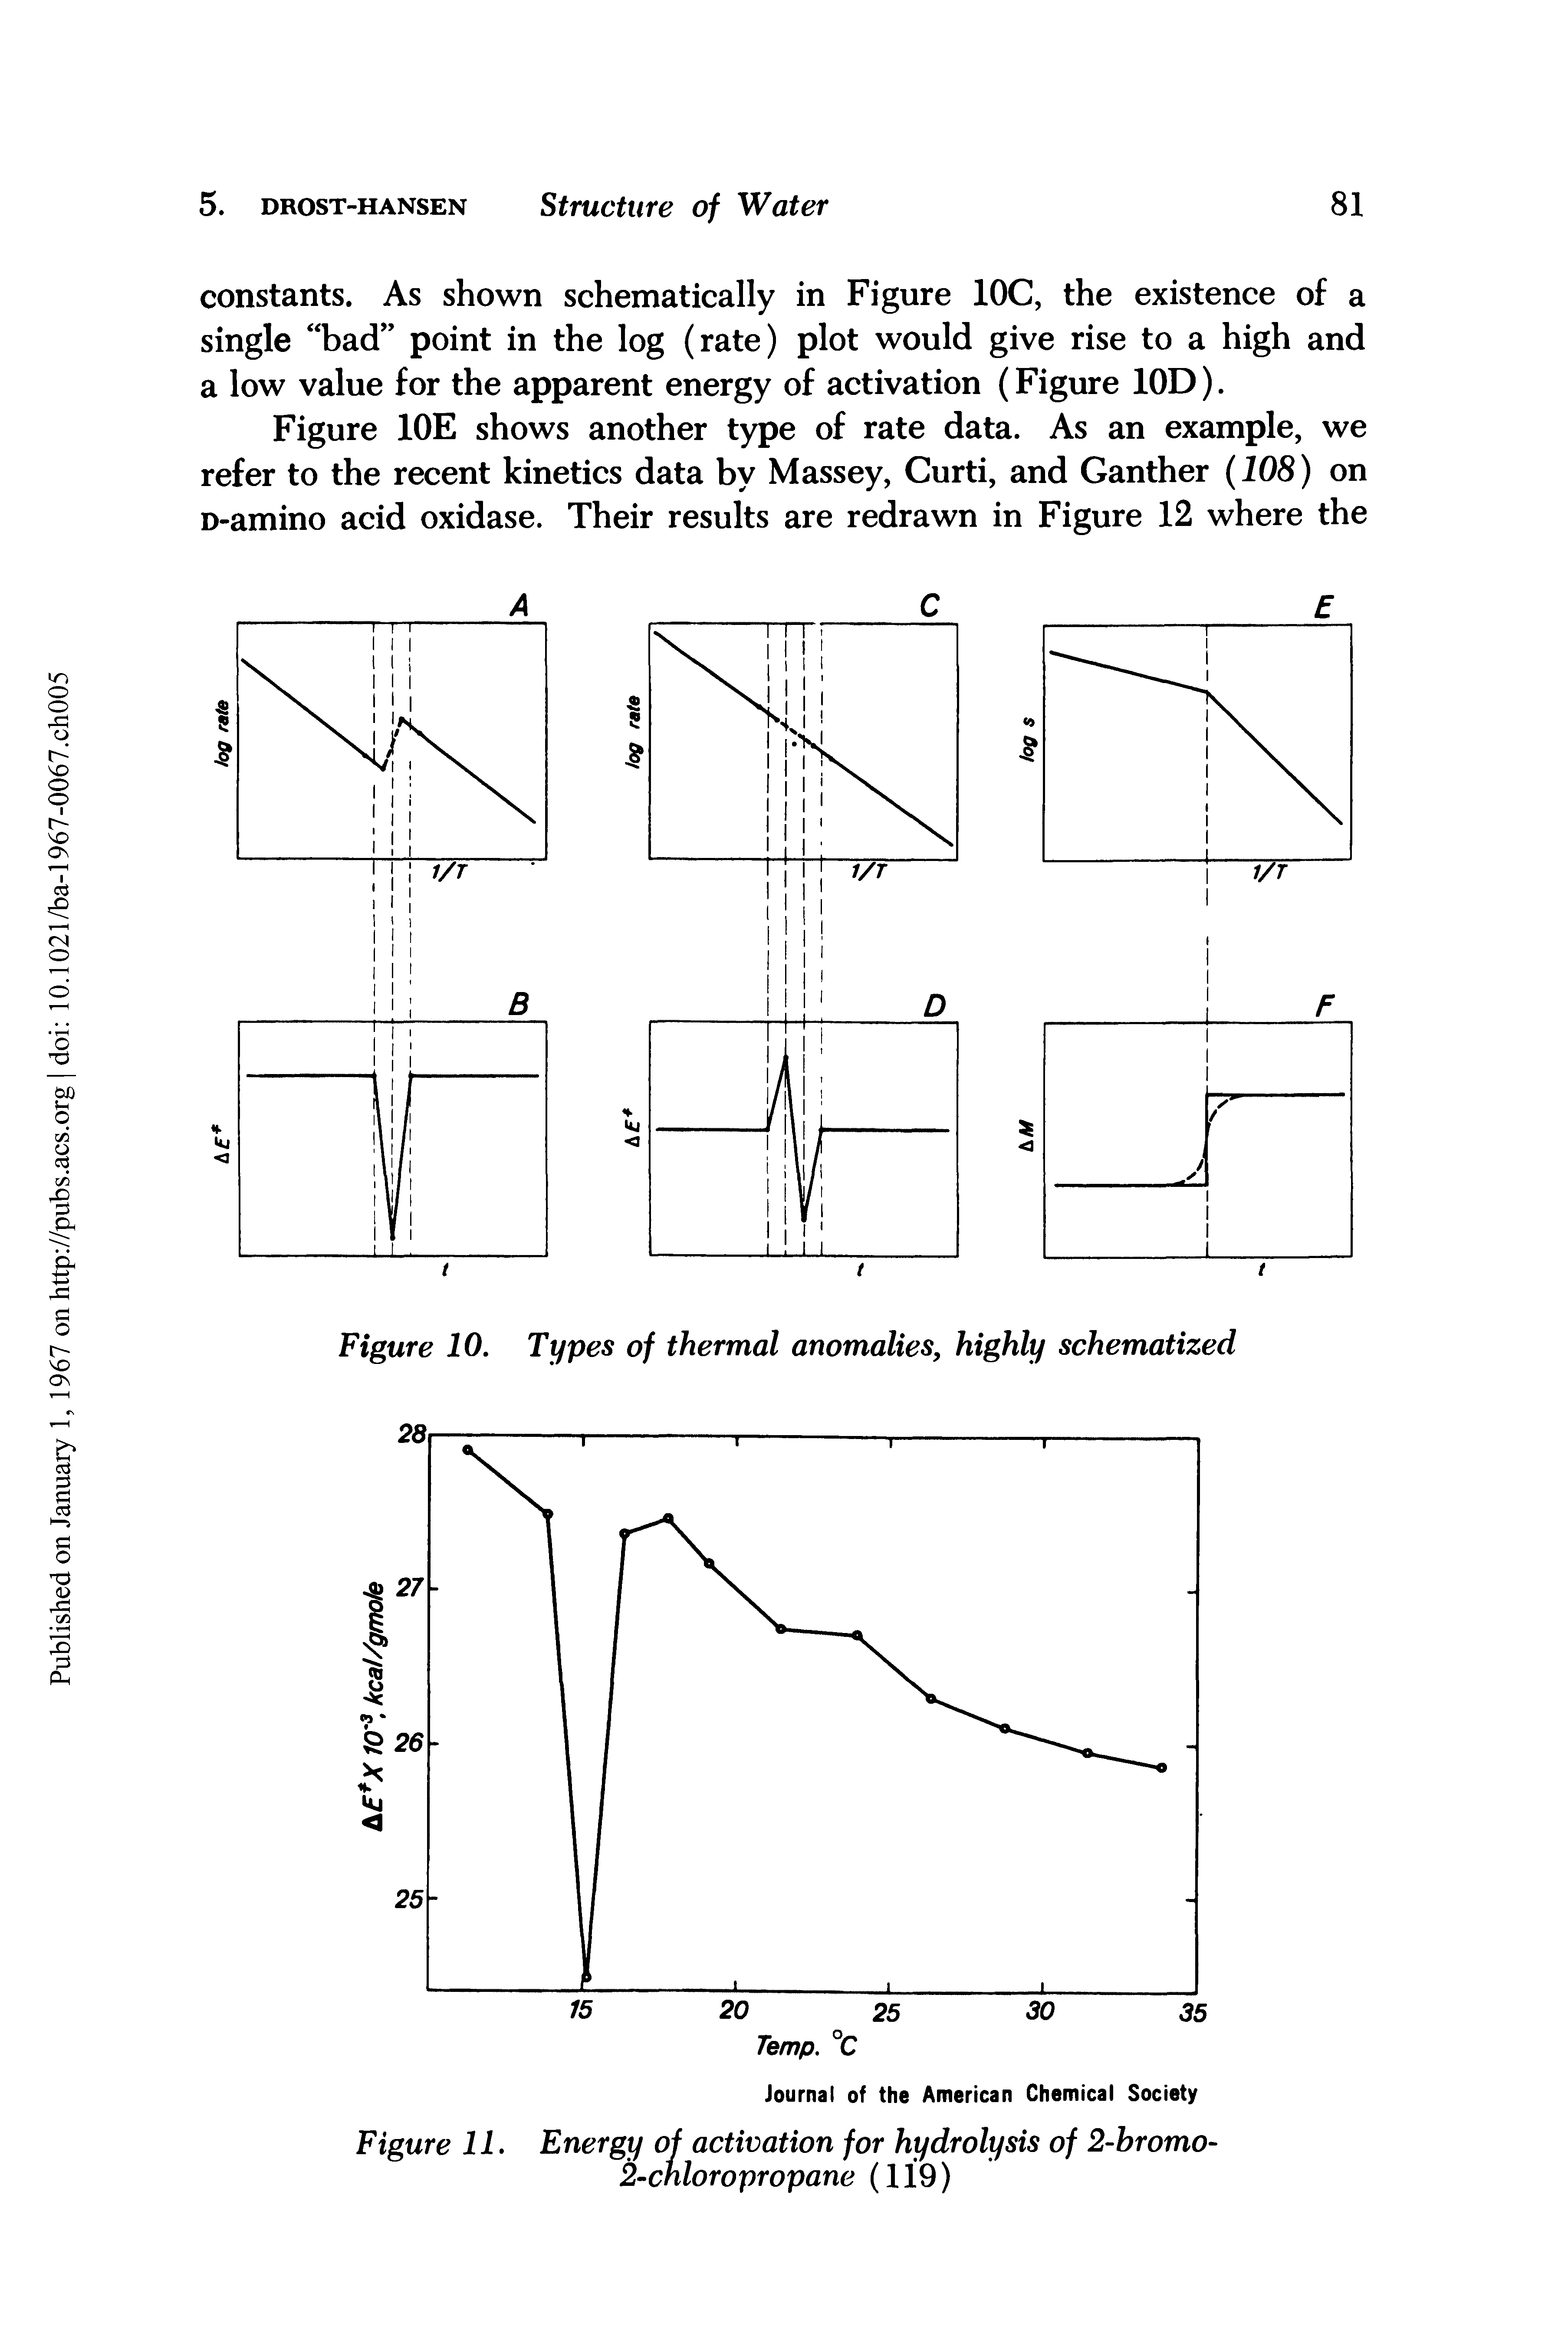 Figure 10. Types of thermal anomalies, highly schematized...